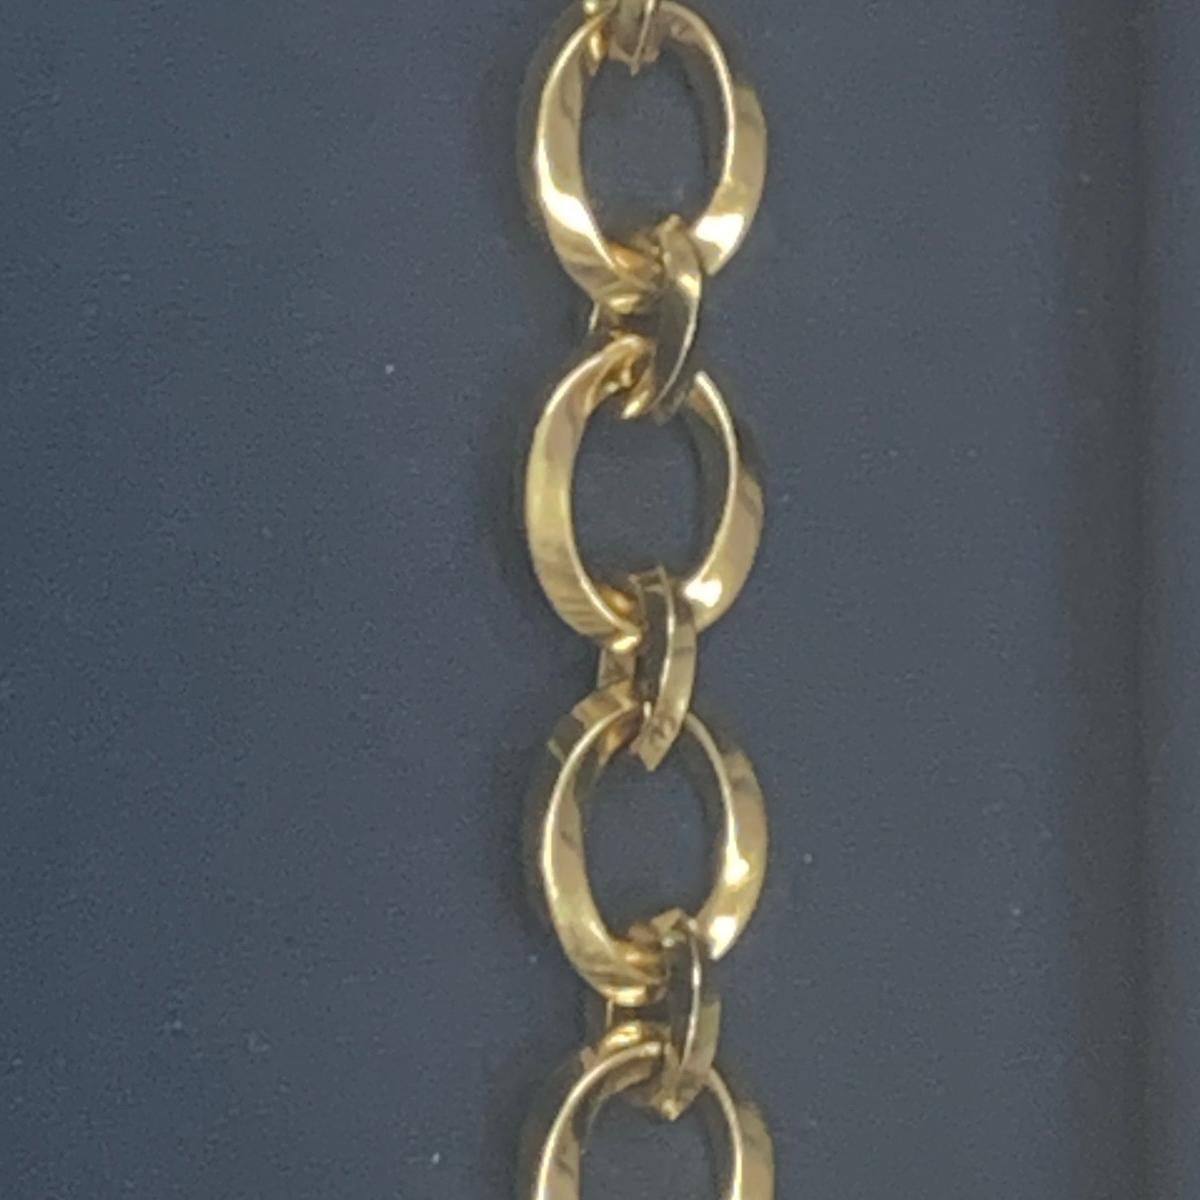 Link bracelet, consisting of alternating smaller and larger open twisted oval-shaped links in polished 18k yellow gold.

Stamped Tiffany & Co
Snap clasp with hinged closure
7